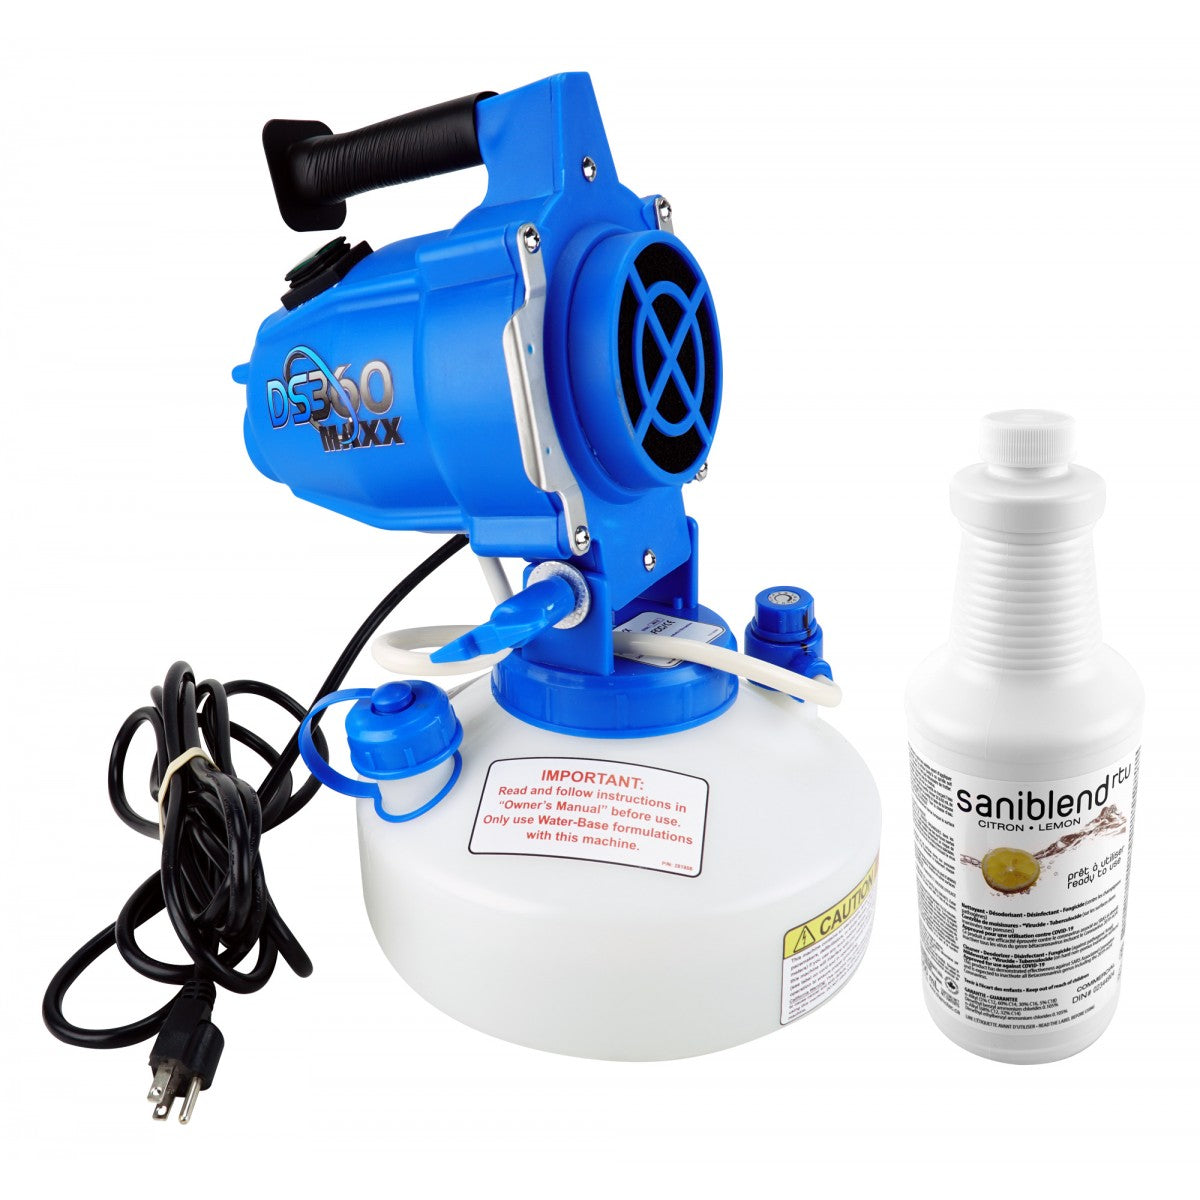 DS360 Electrostatic Sprayer with Cleaner